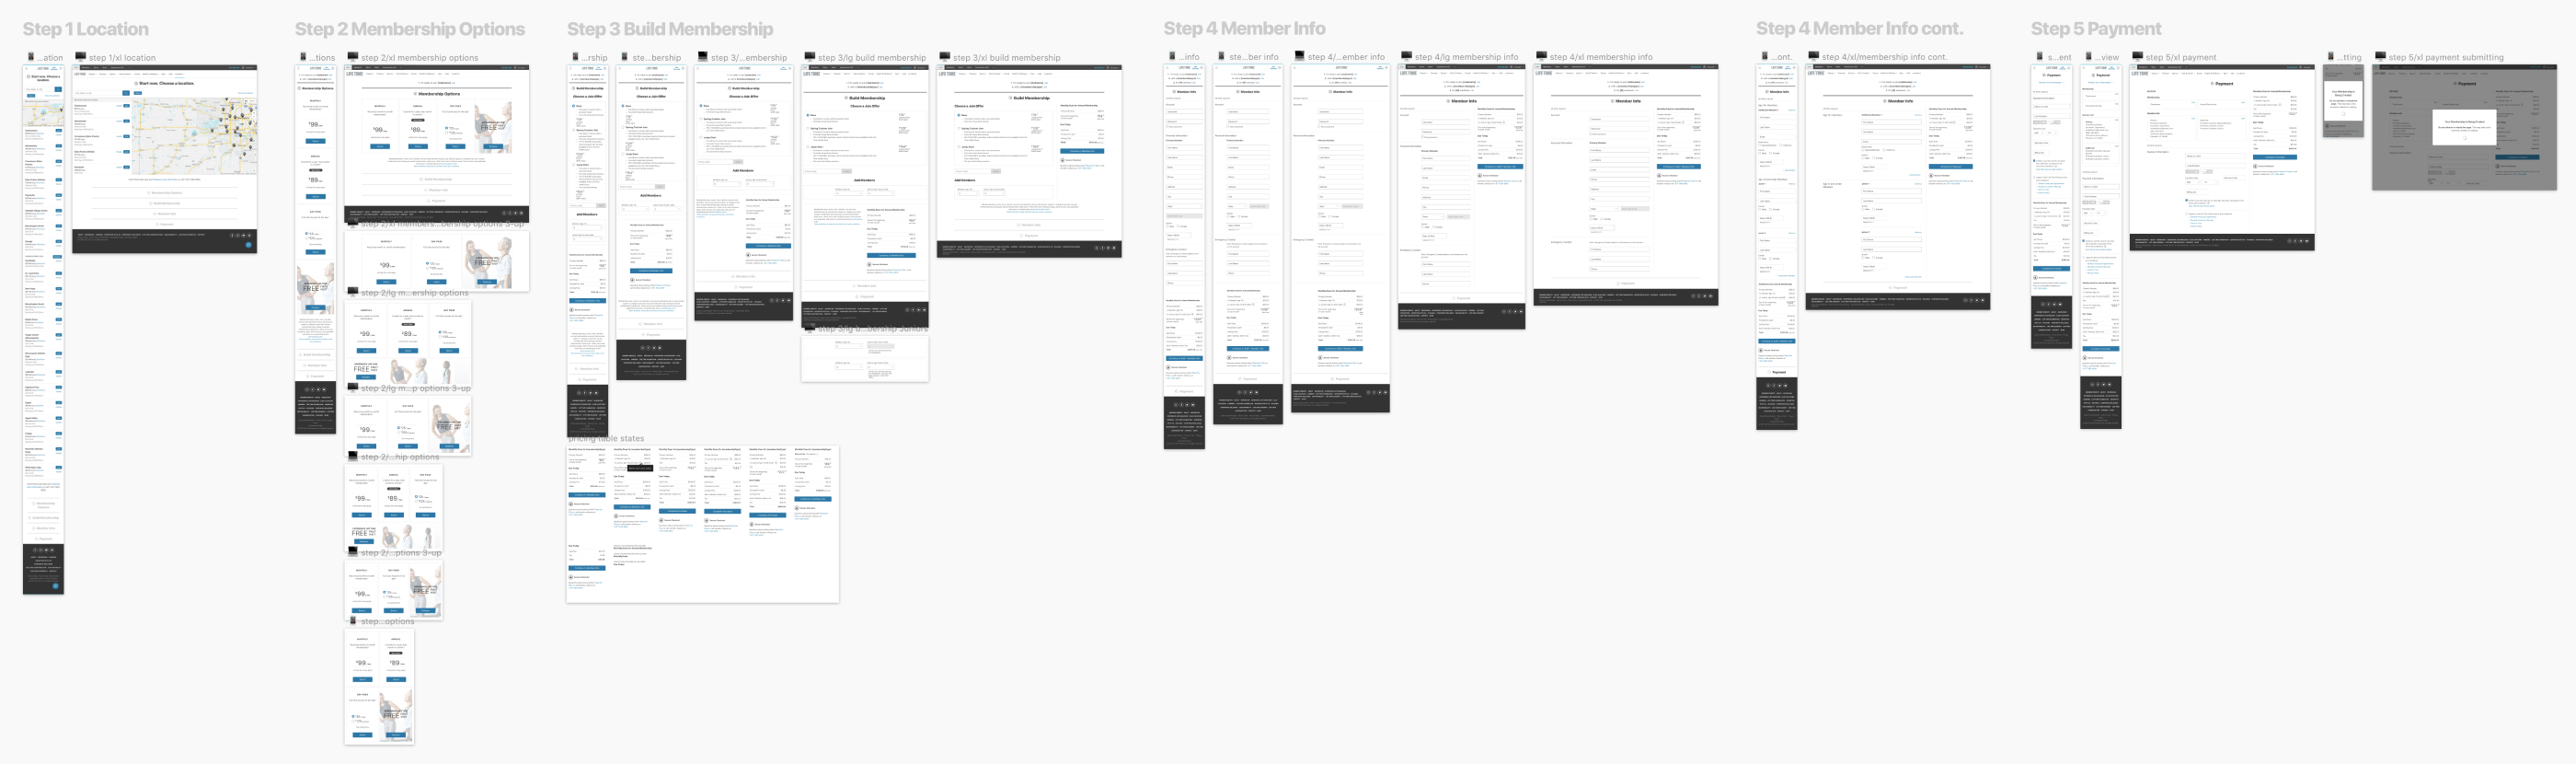 Wireframes of All Steps in the Website at Different Breakpoints